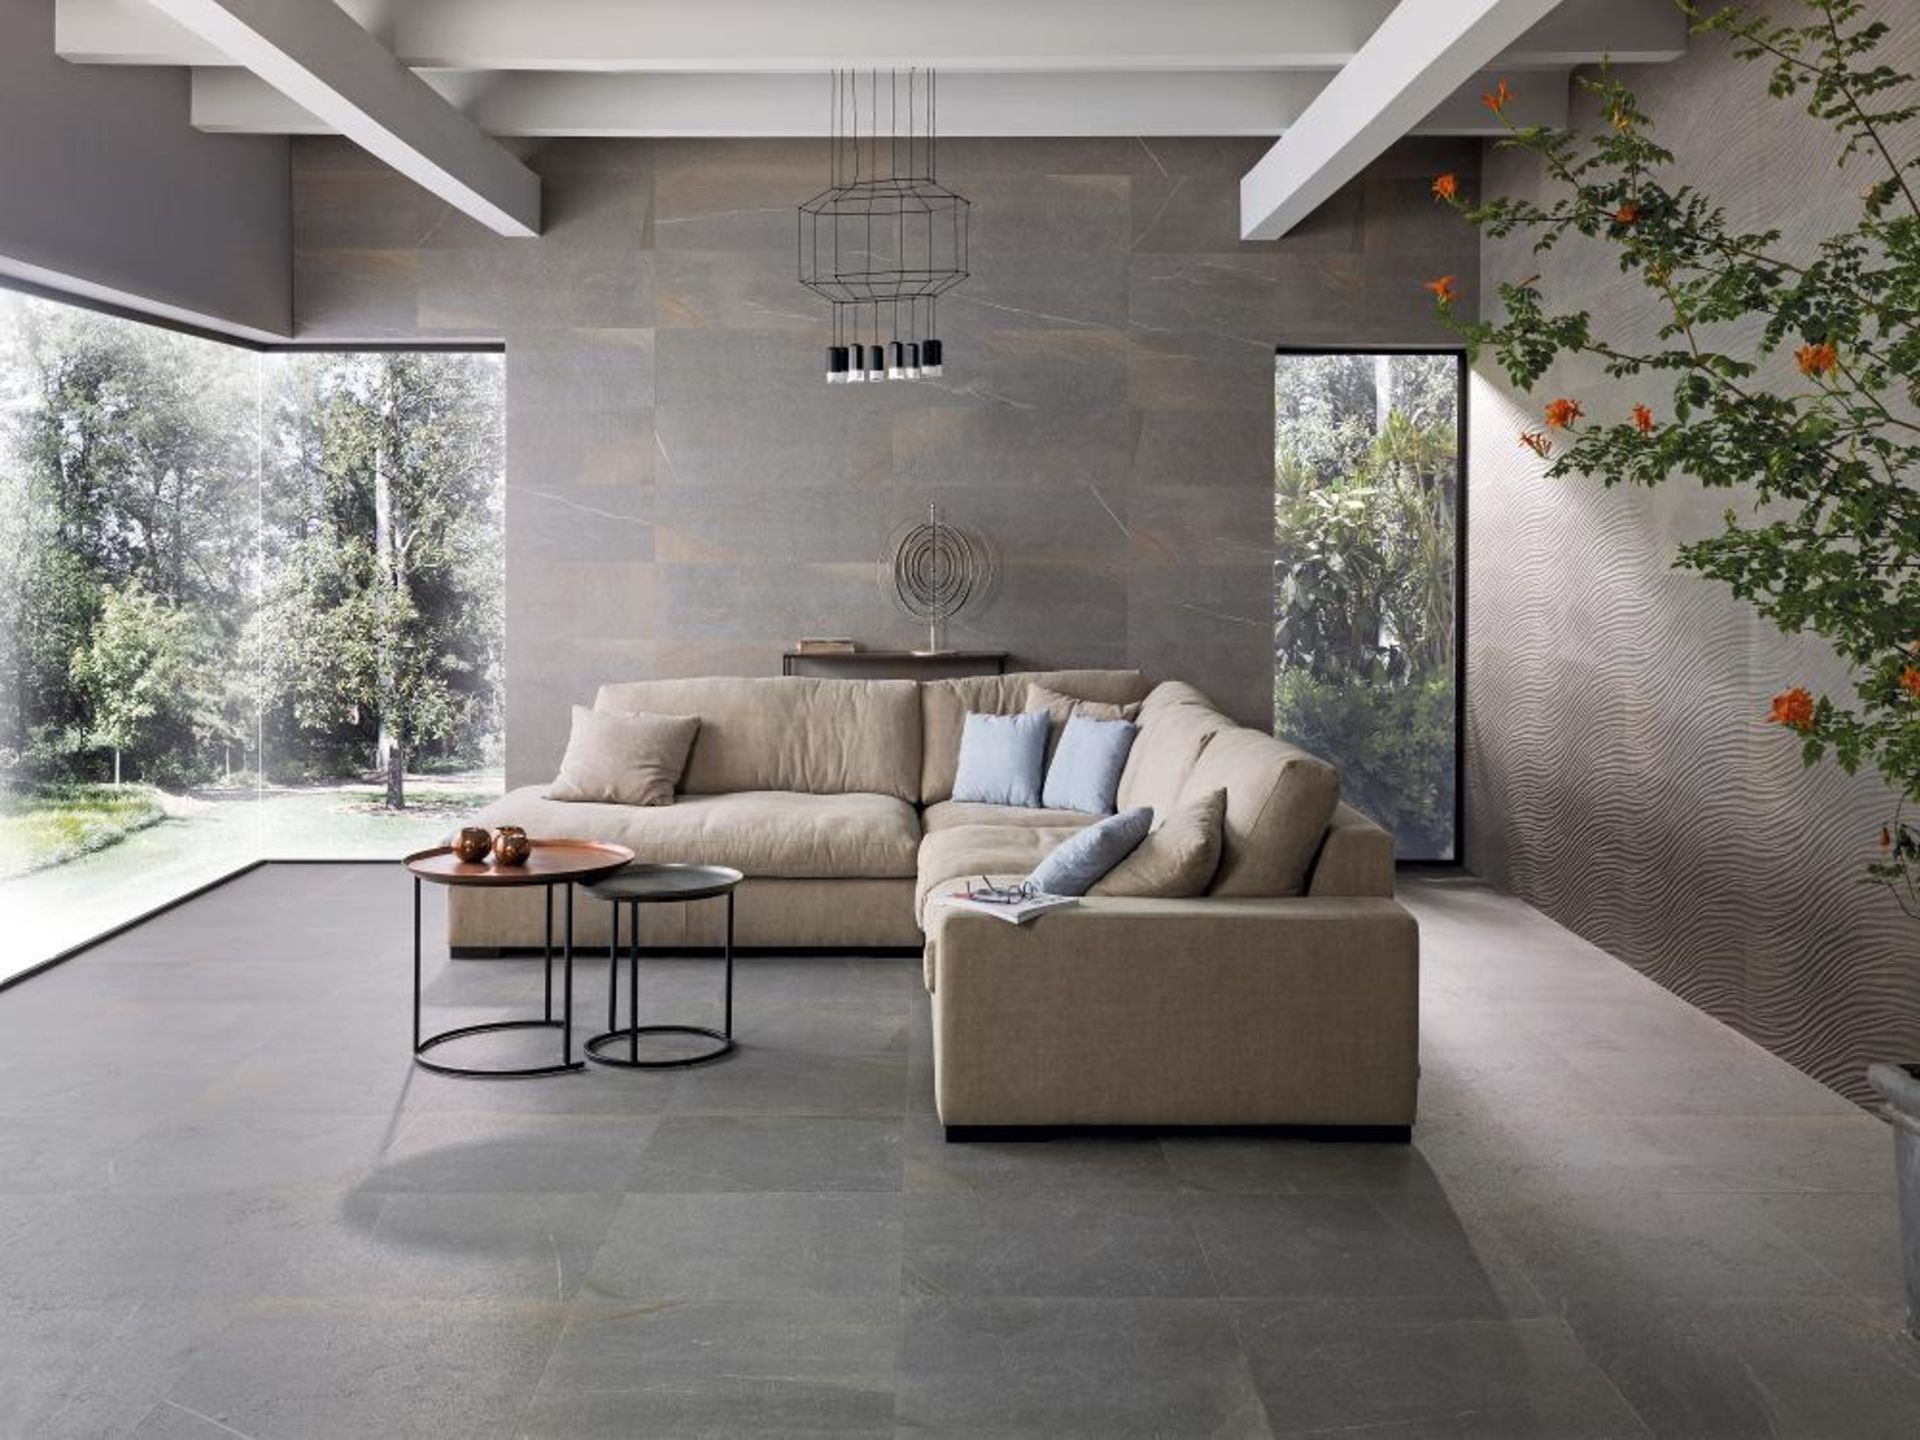 9.94 Square Meters of Porcelanosa Dayton Graphite Floor and Wall Tiles. 59.6x59.6cm per tile. 1.42m2